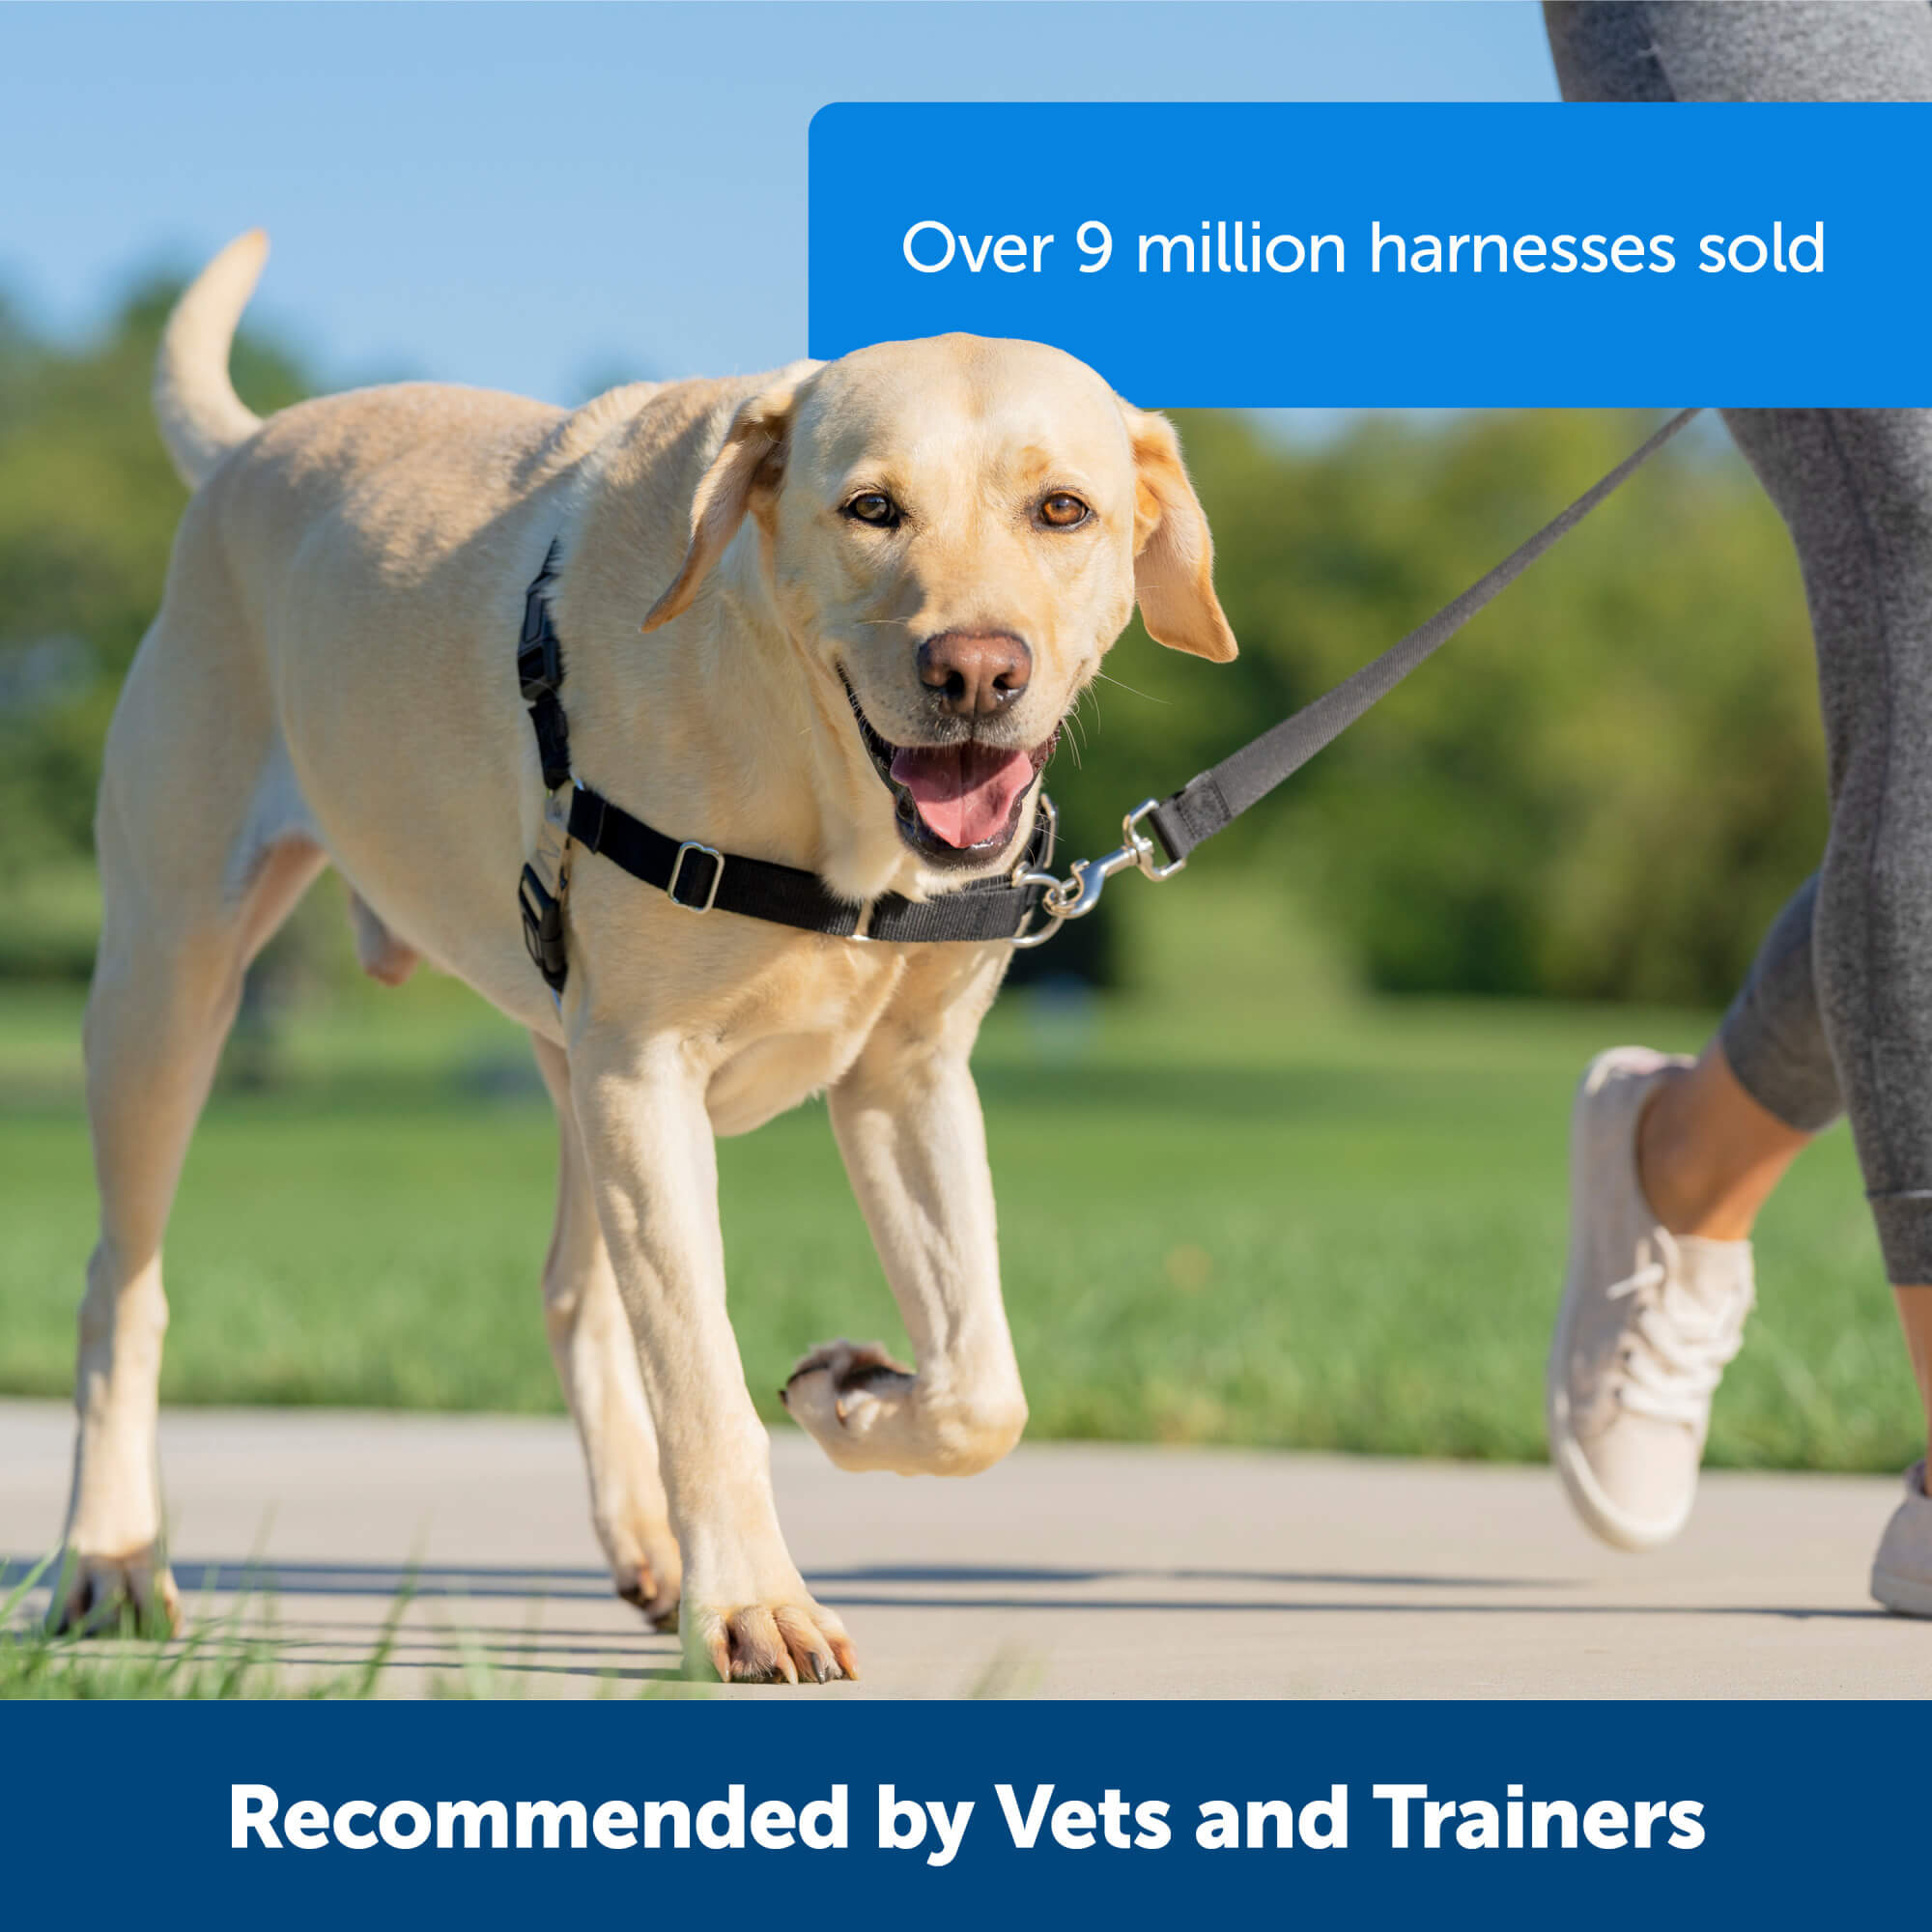 Recommended by vets and trainers